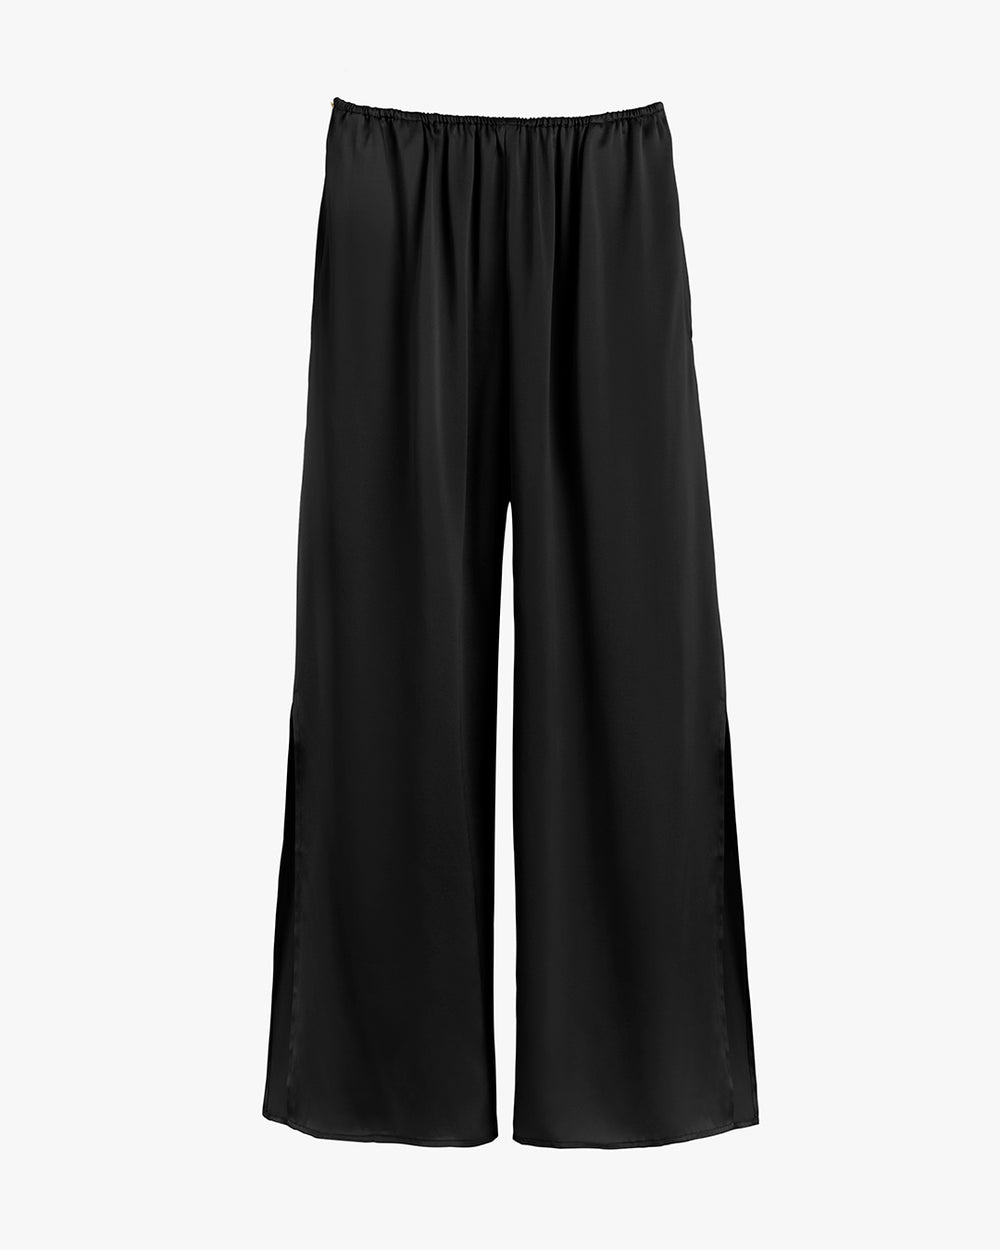 Pair of wide-legged pants with elastic waistband